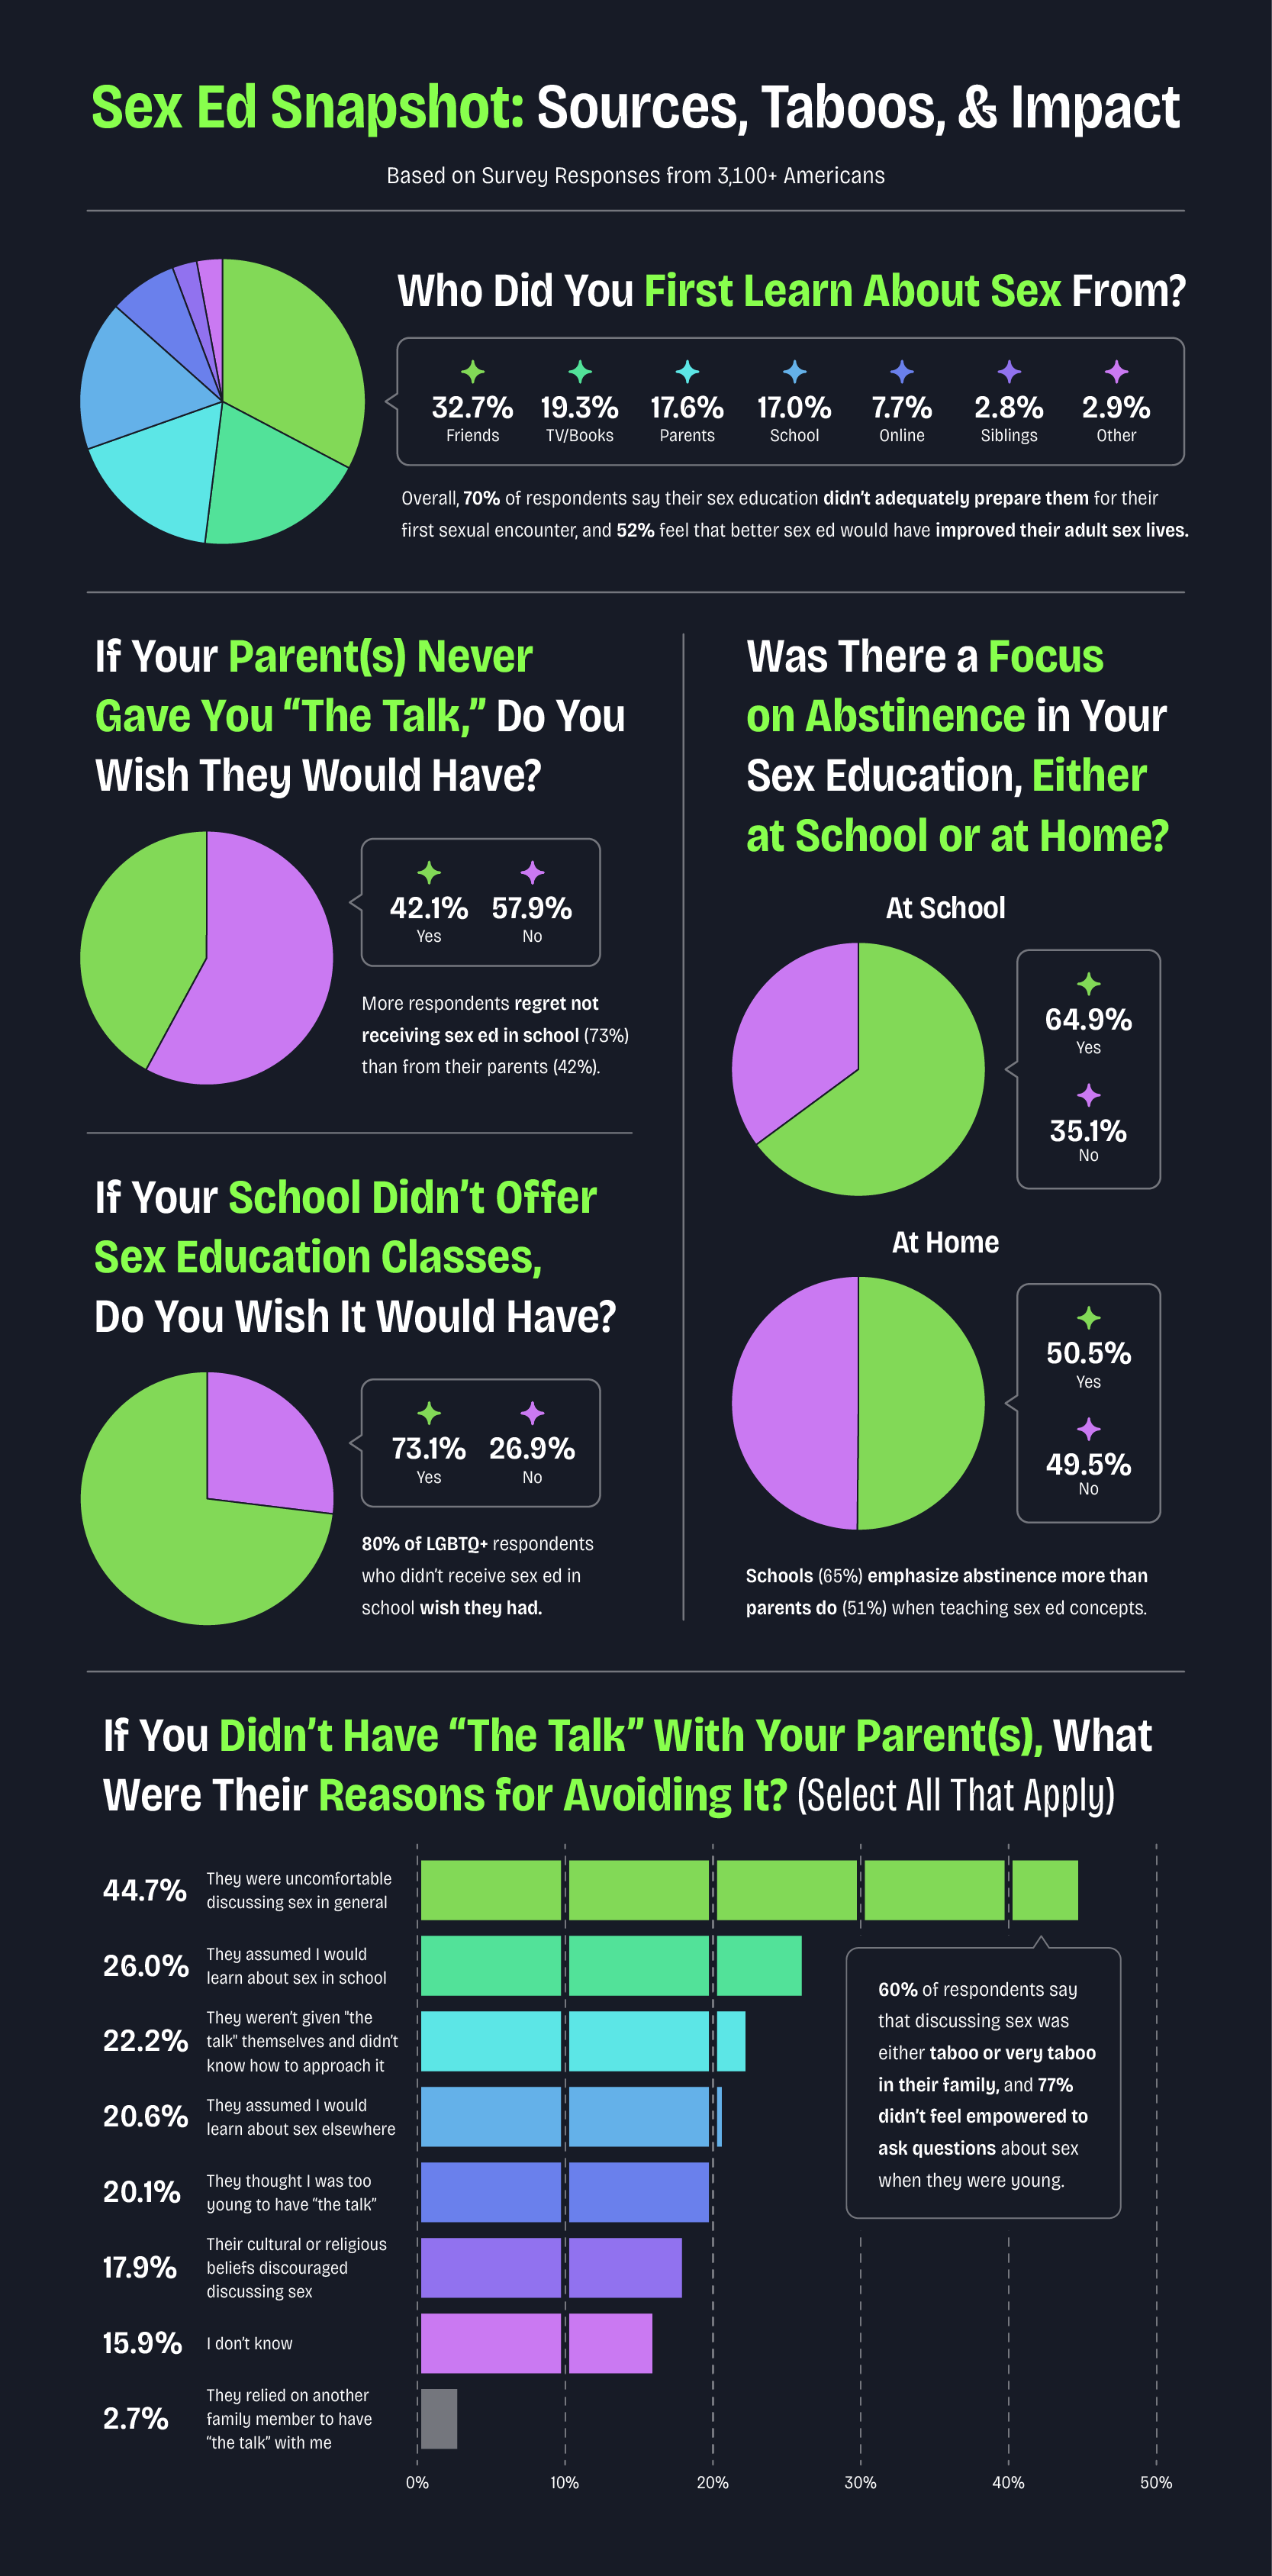 an infographic with sex ed statistics regarding sources, taboos, preparedness, and impacts